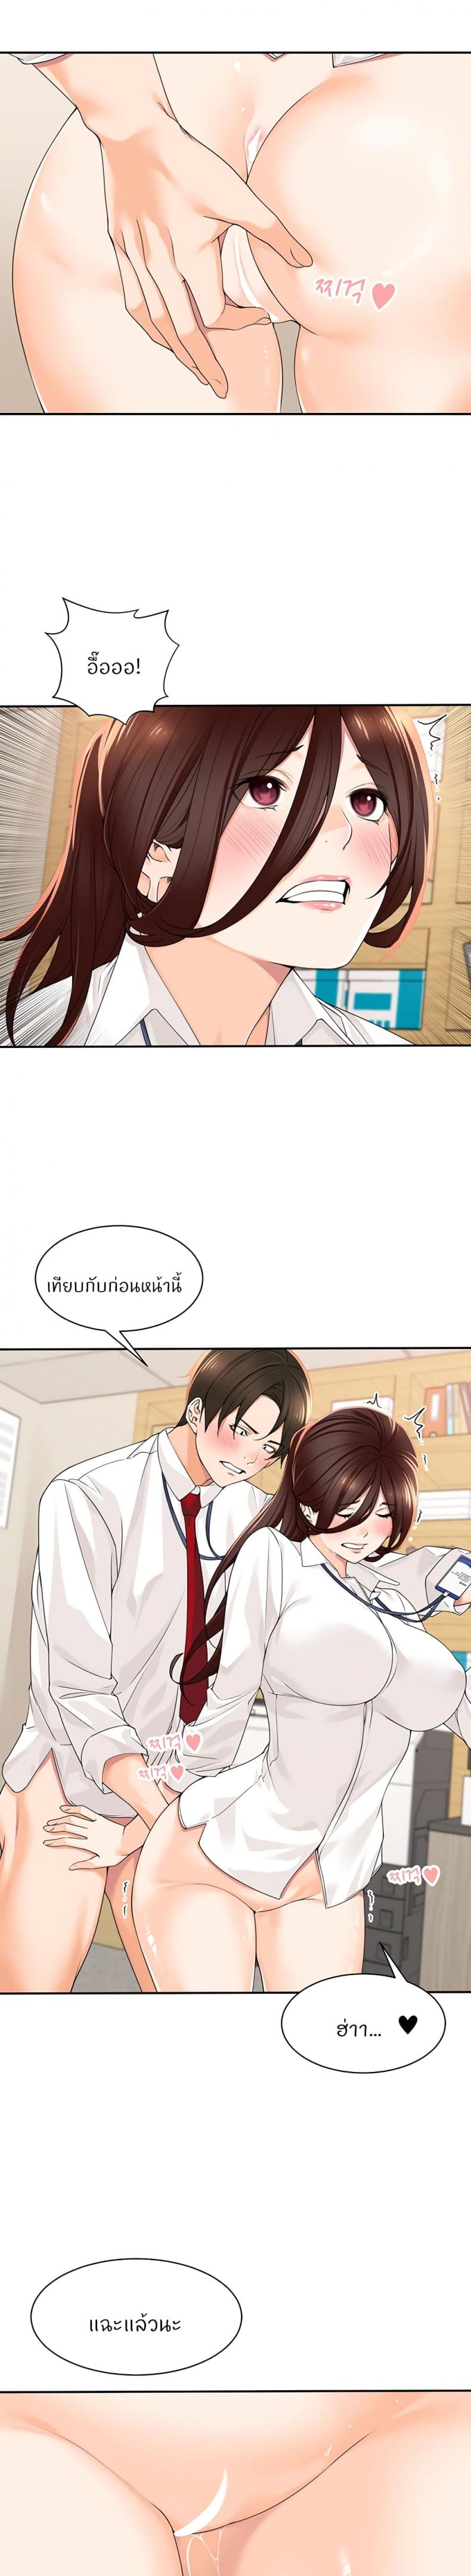 Manager, Please Scold Me 6 ภาพที่ 11